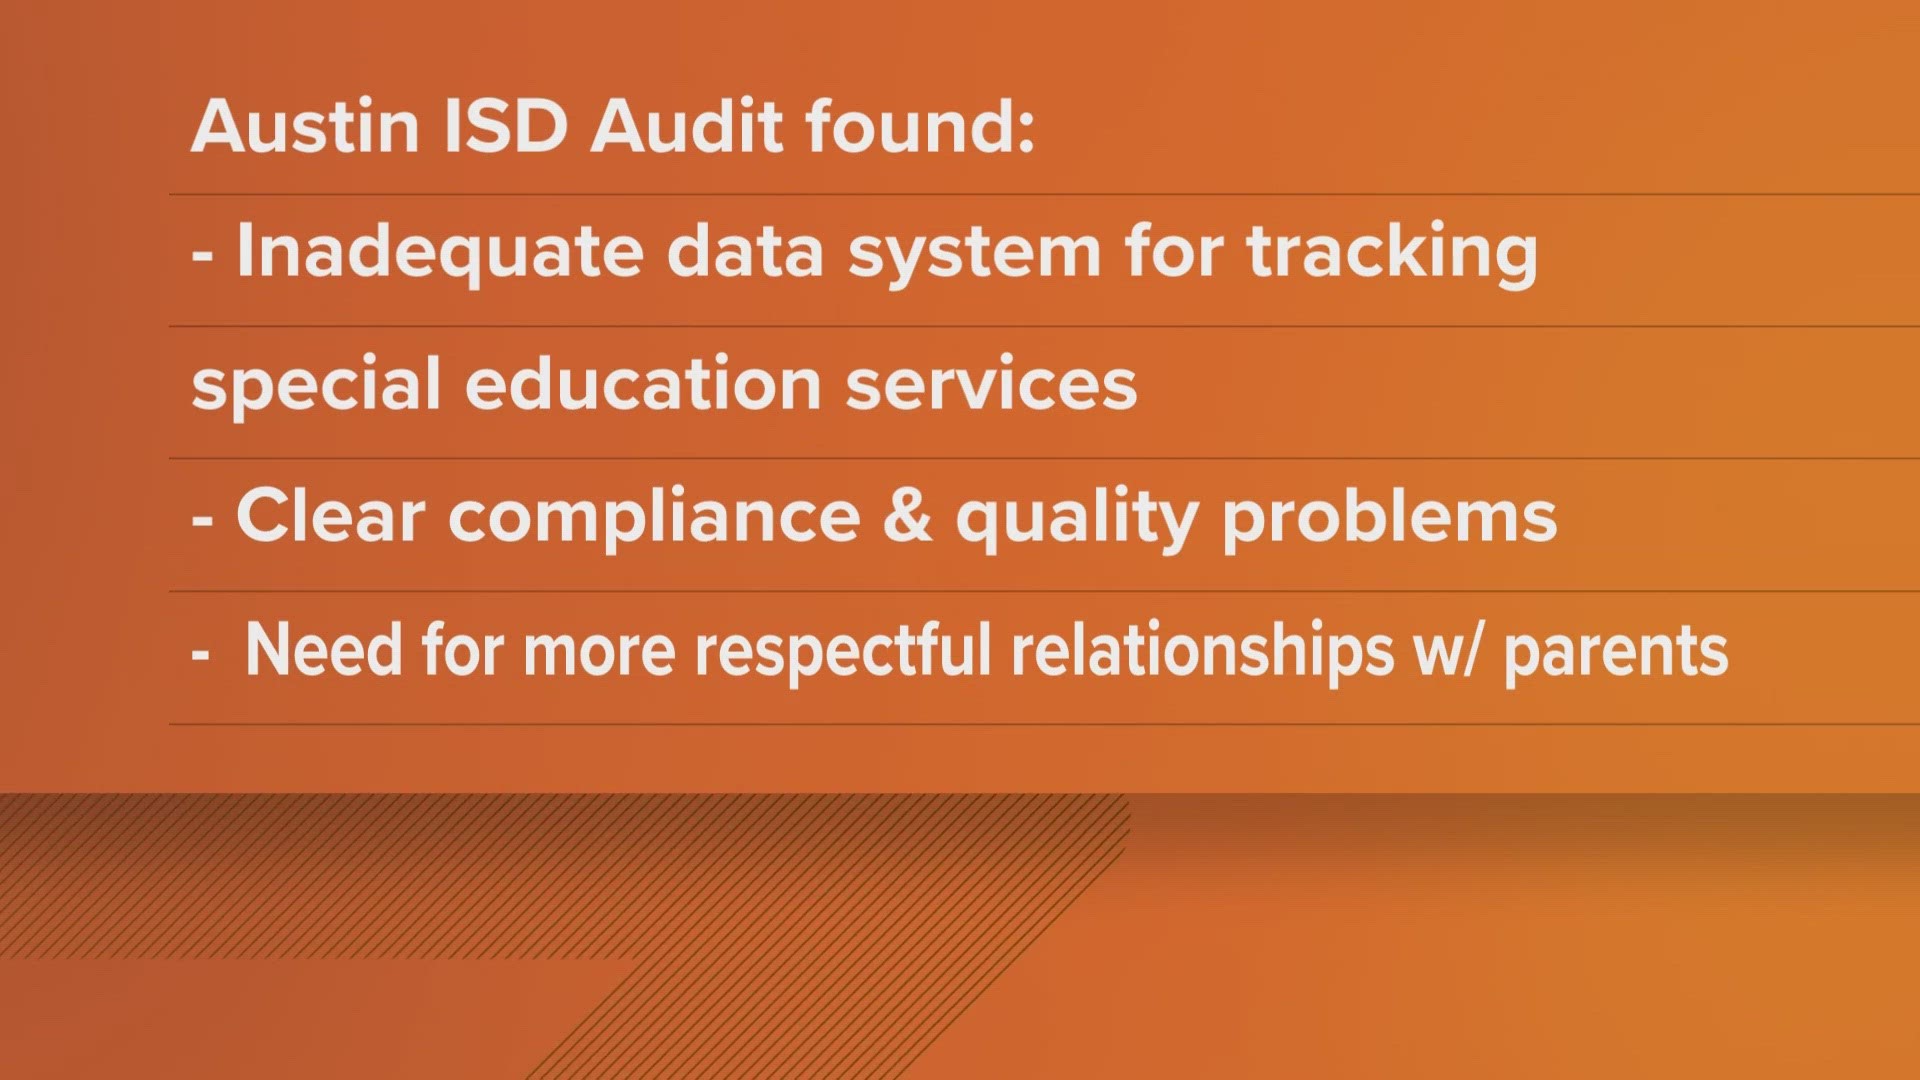 The audit states AISD could use a better data system, improve relationships with student parents, and more.